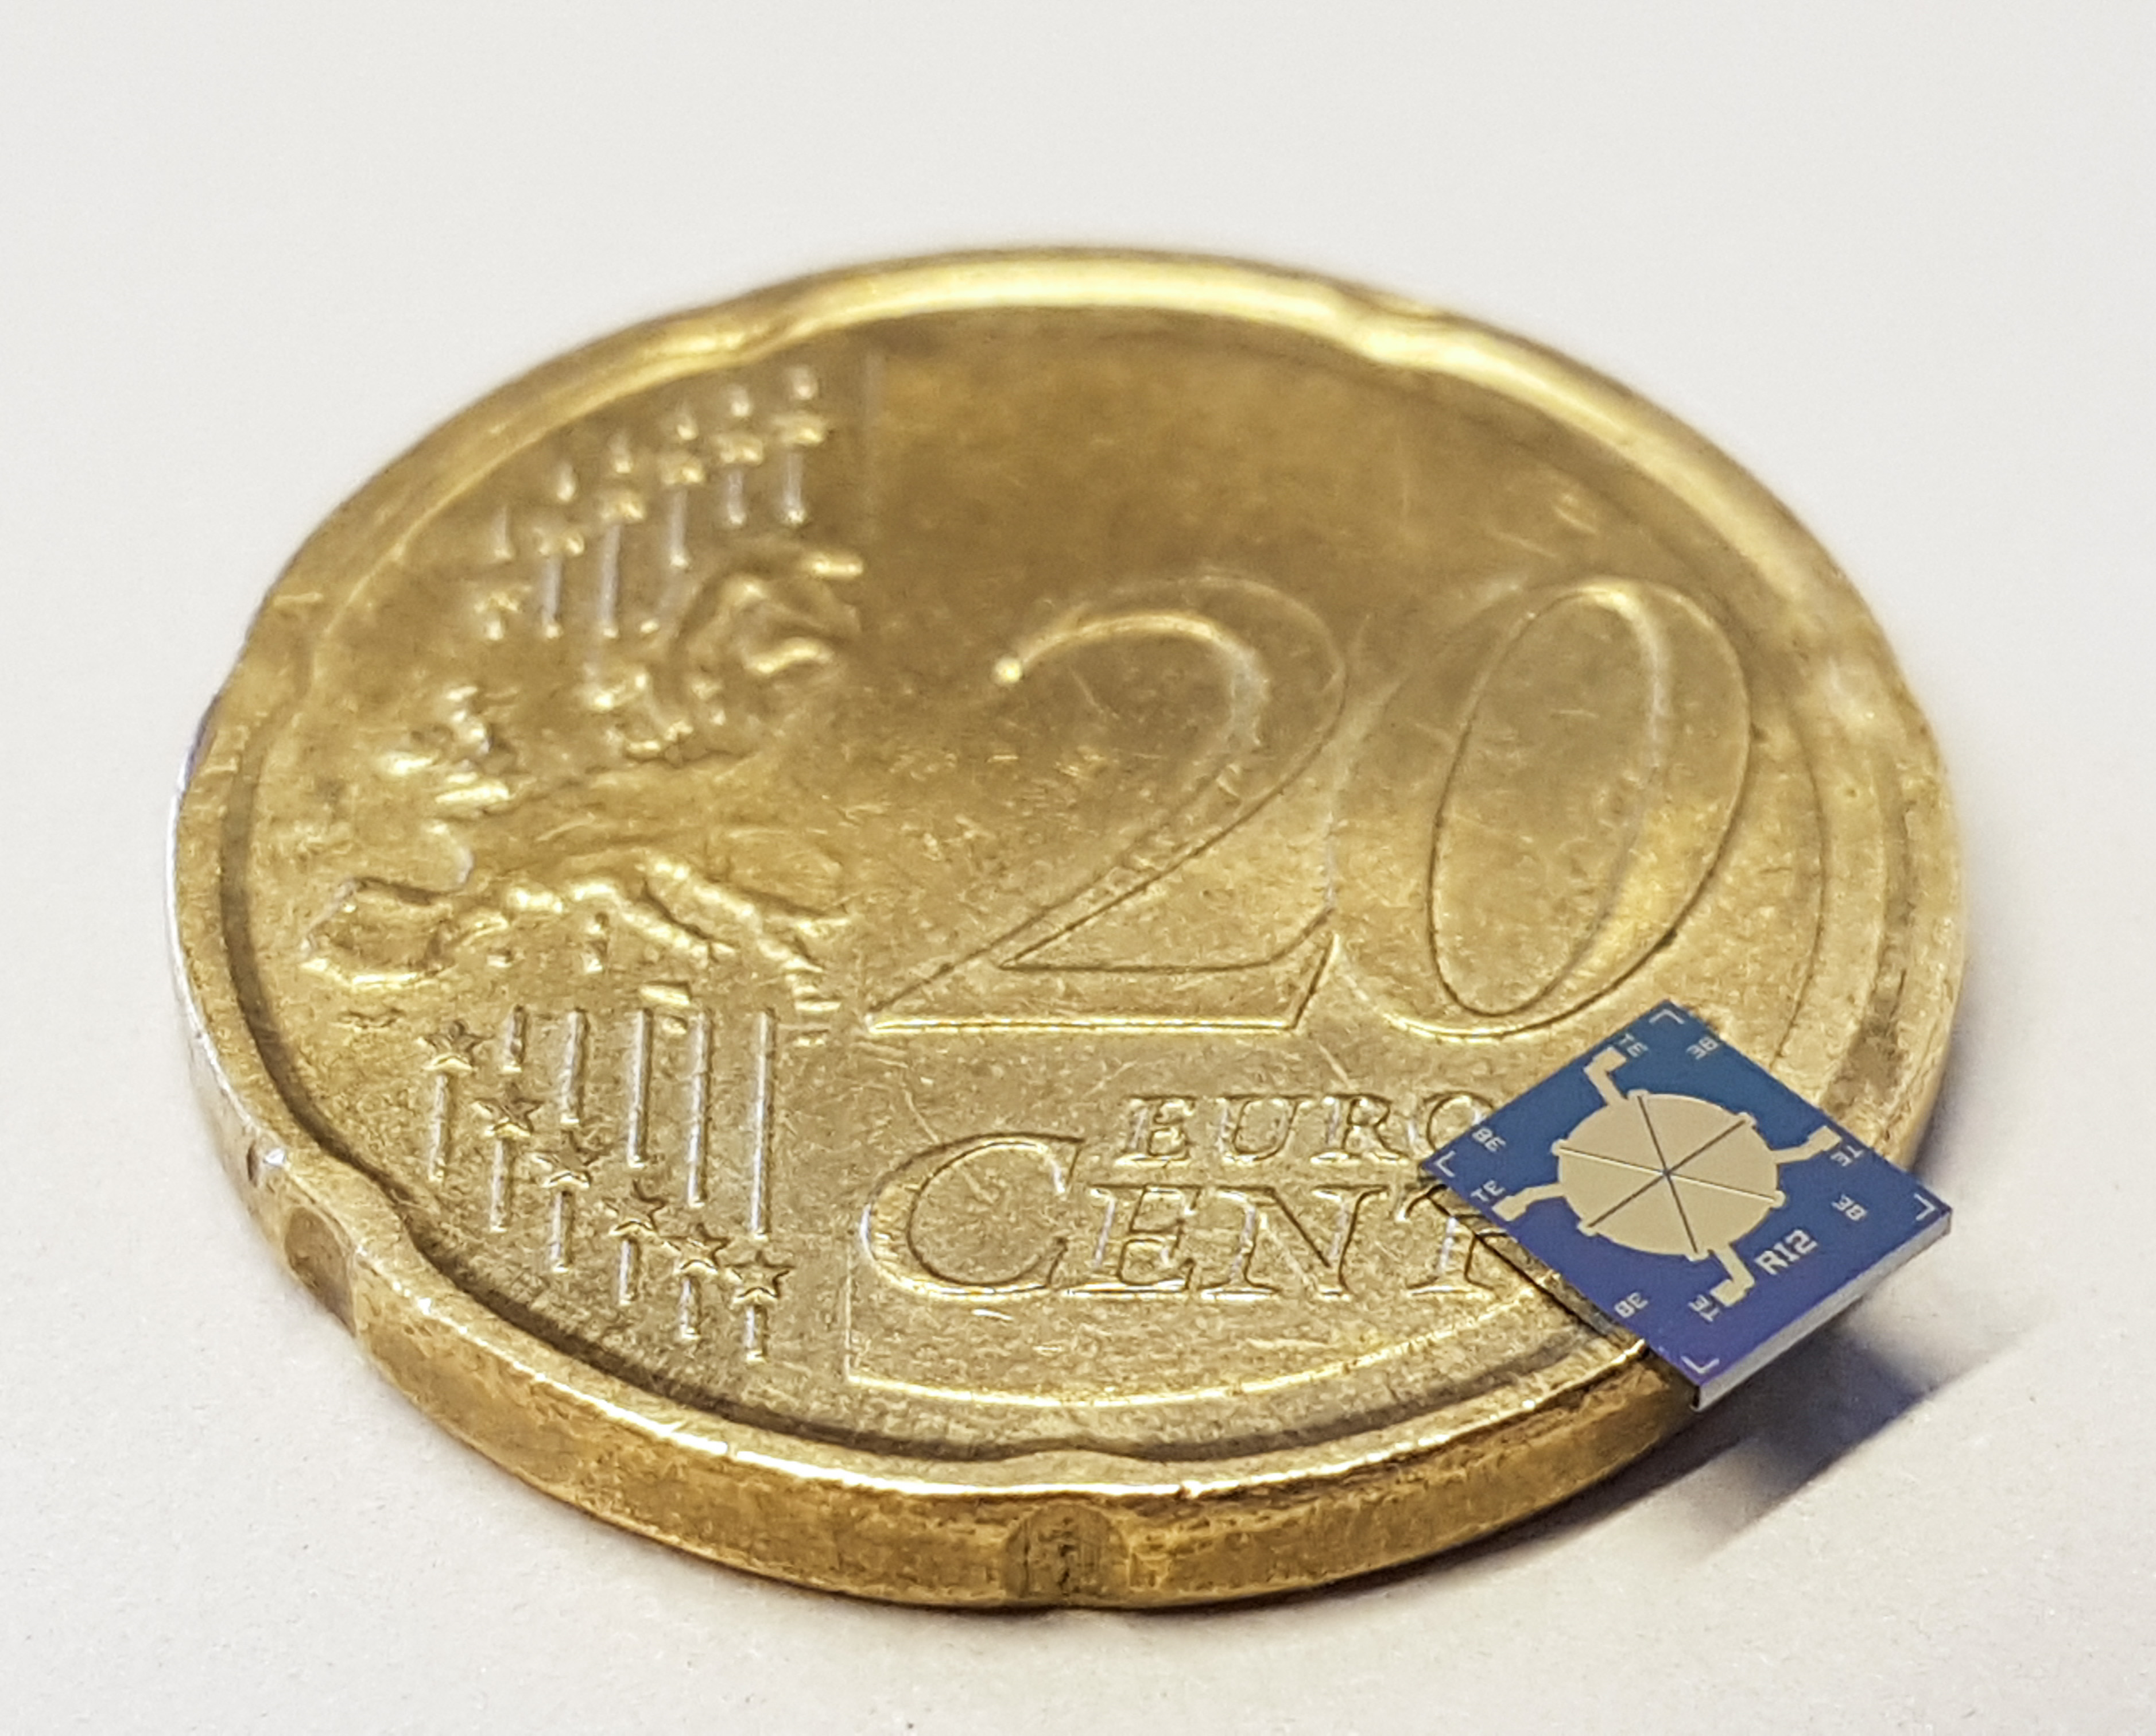 New one-way MEMS speaker with an area of just 4x4 millimeters.